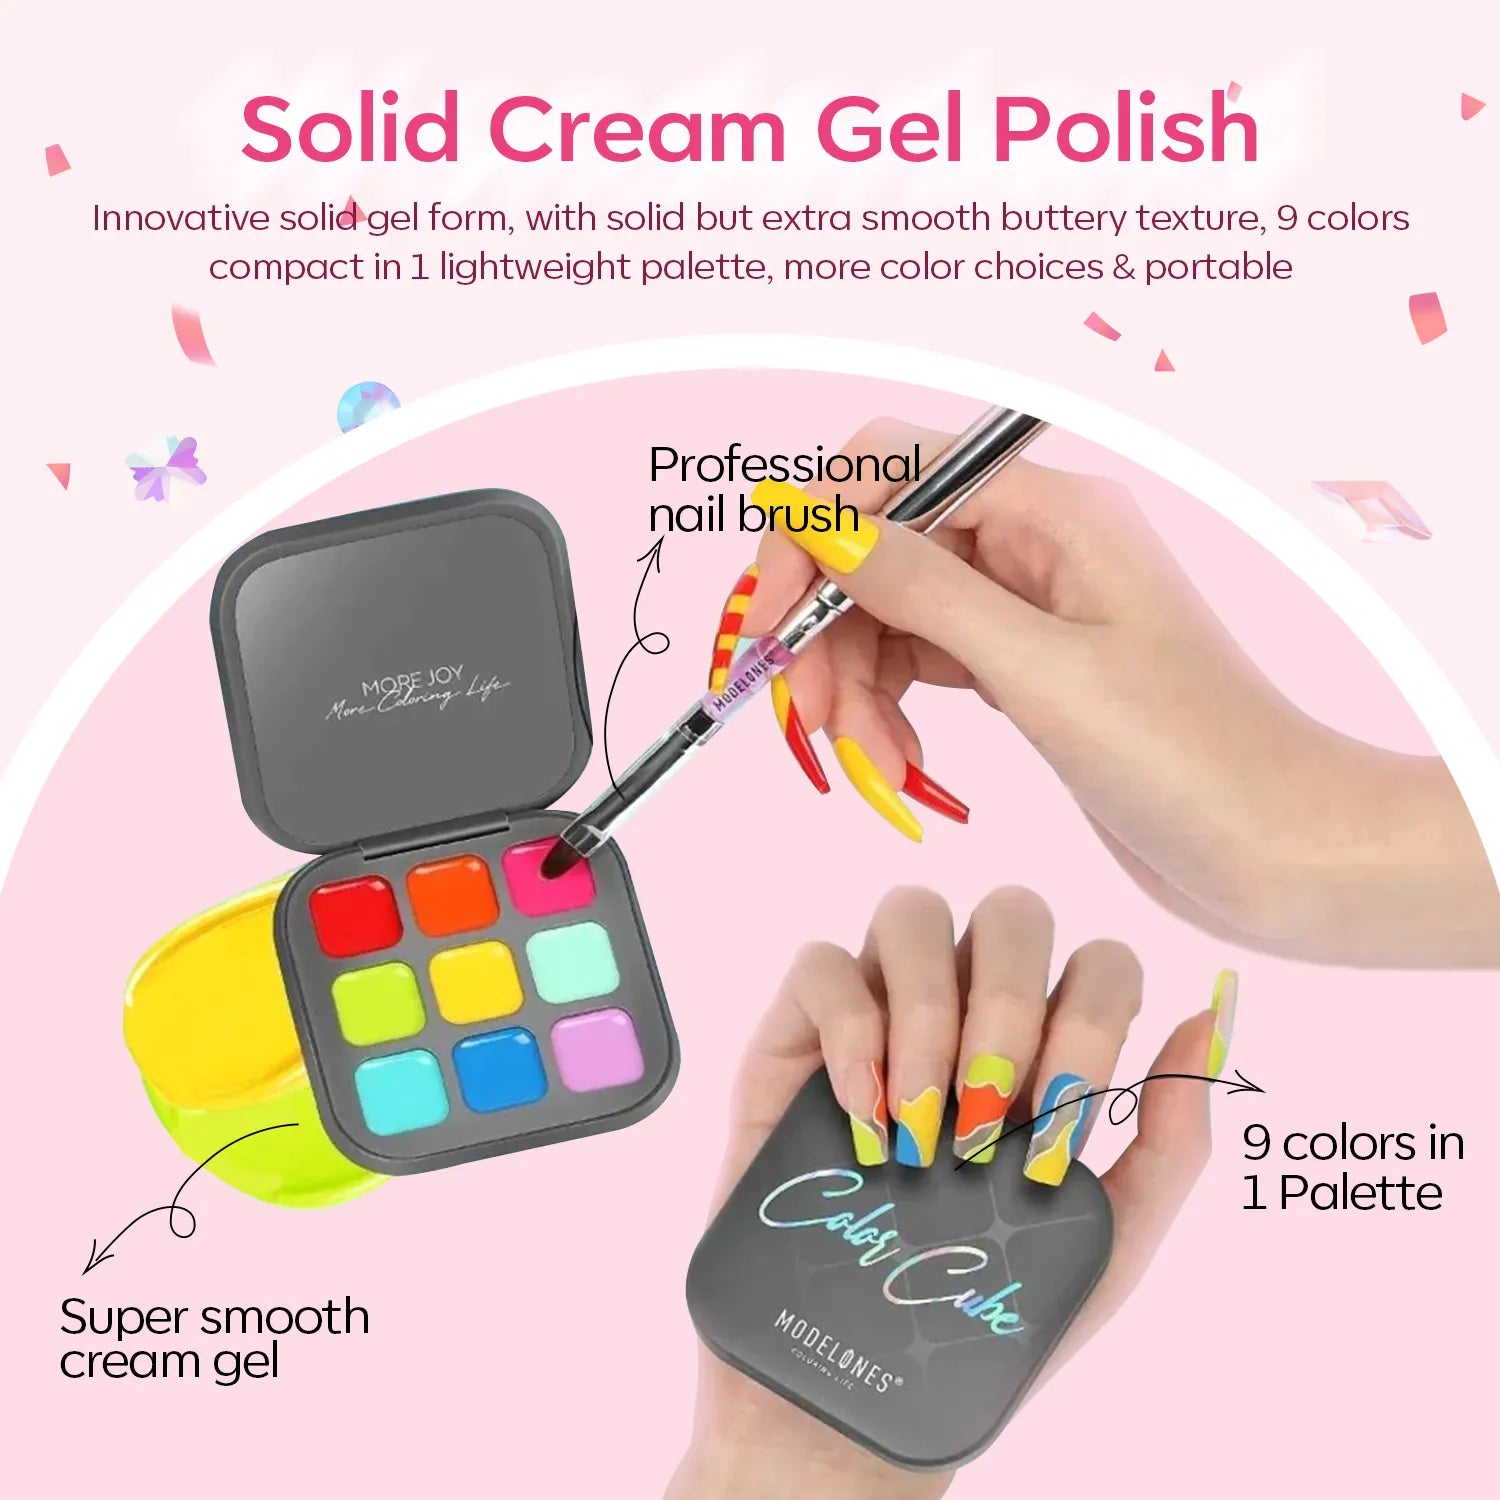 16Pcs Gel Nail Polish & Color Cube All-in-One Starter Kit